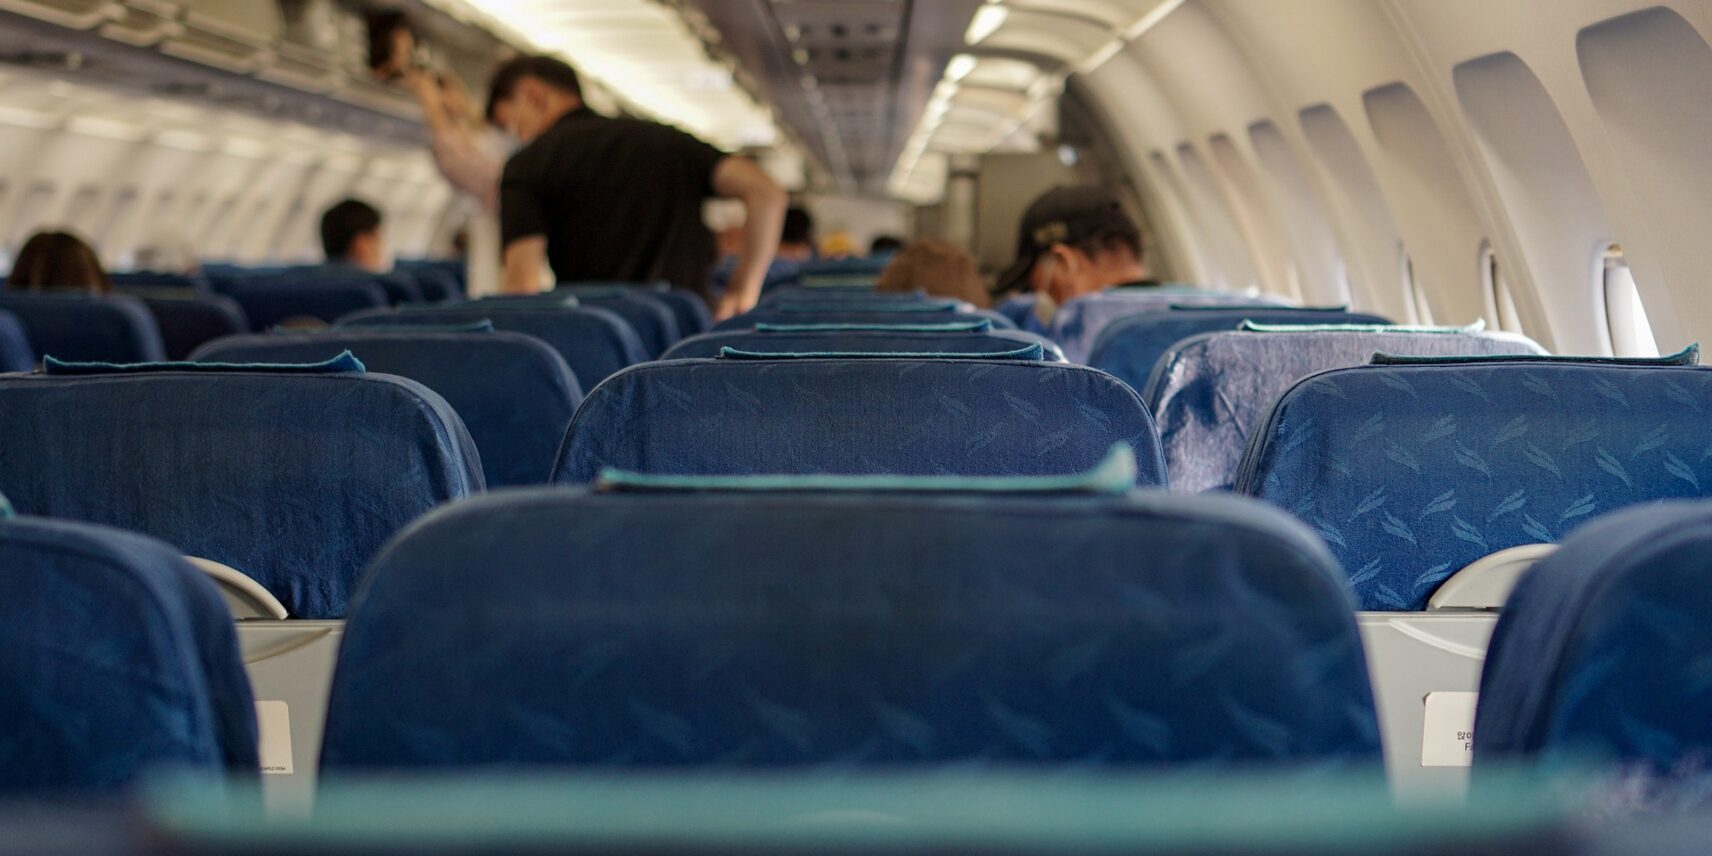 The empty seats of an airplane.